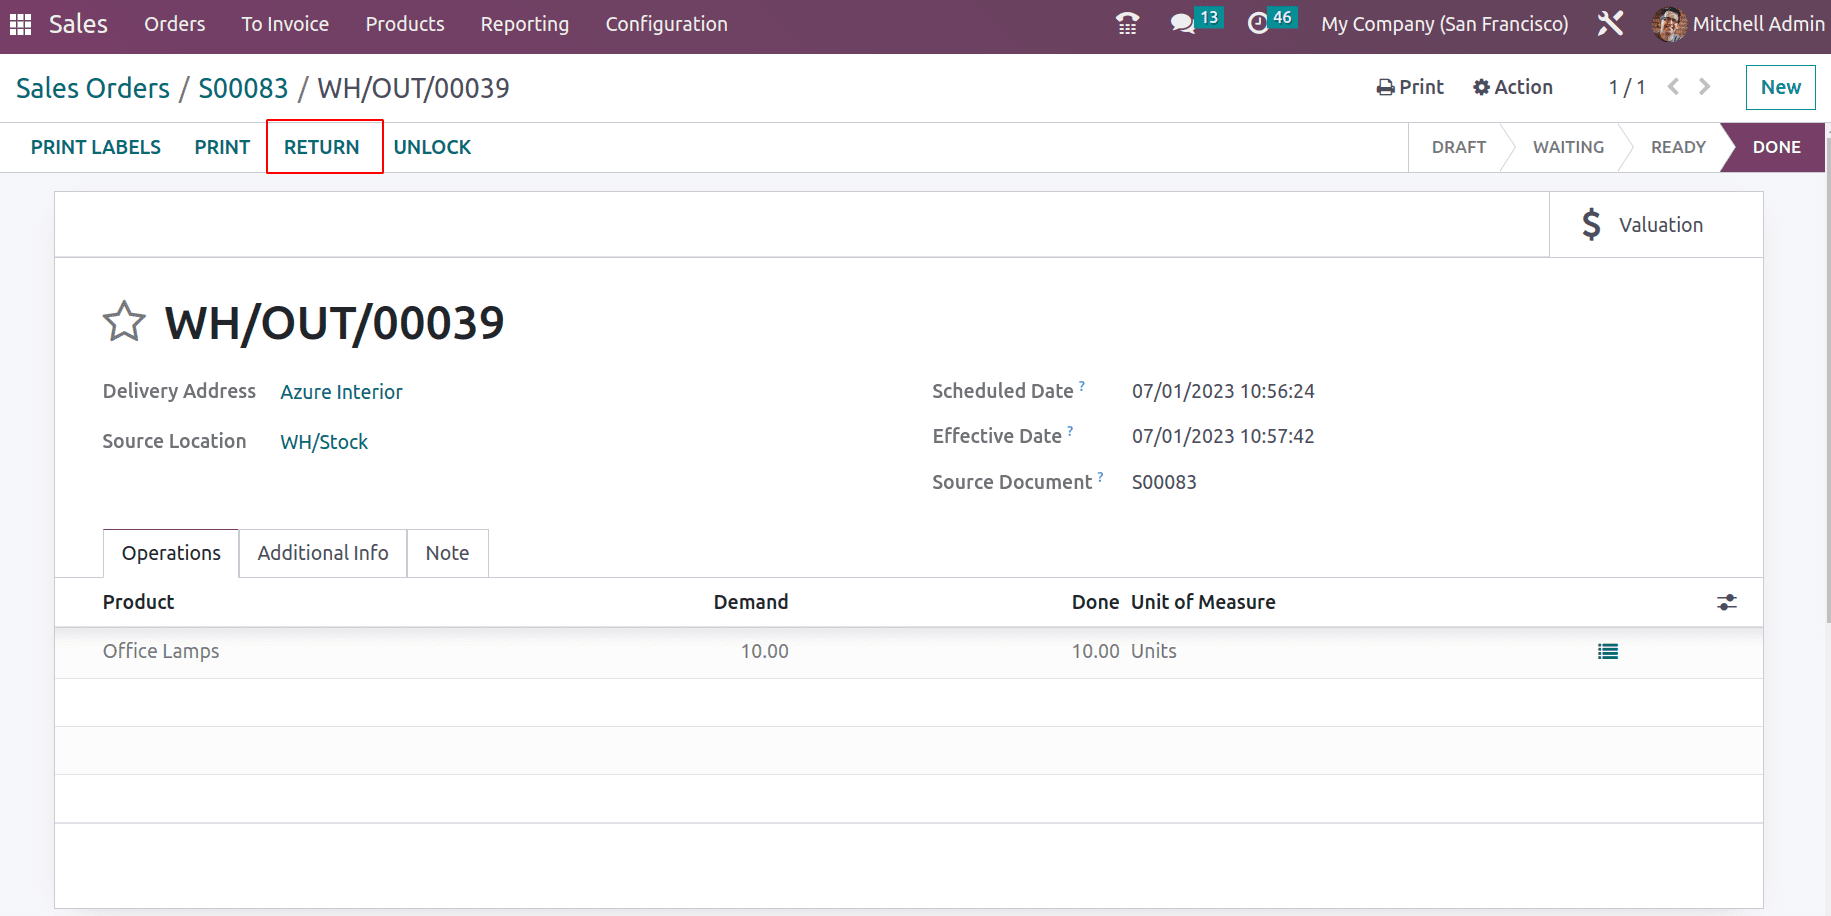 A Detailed Overview of Storono Accounting in Odoo 16-cybrosys